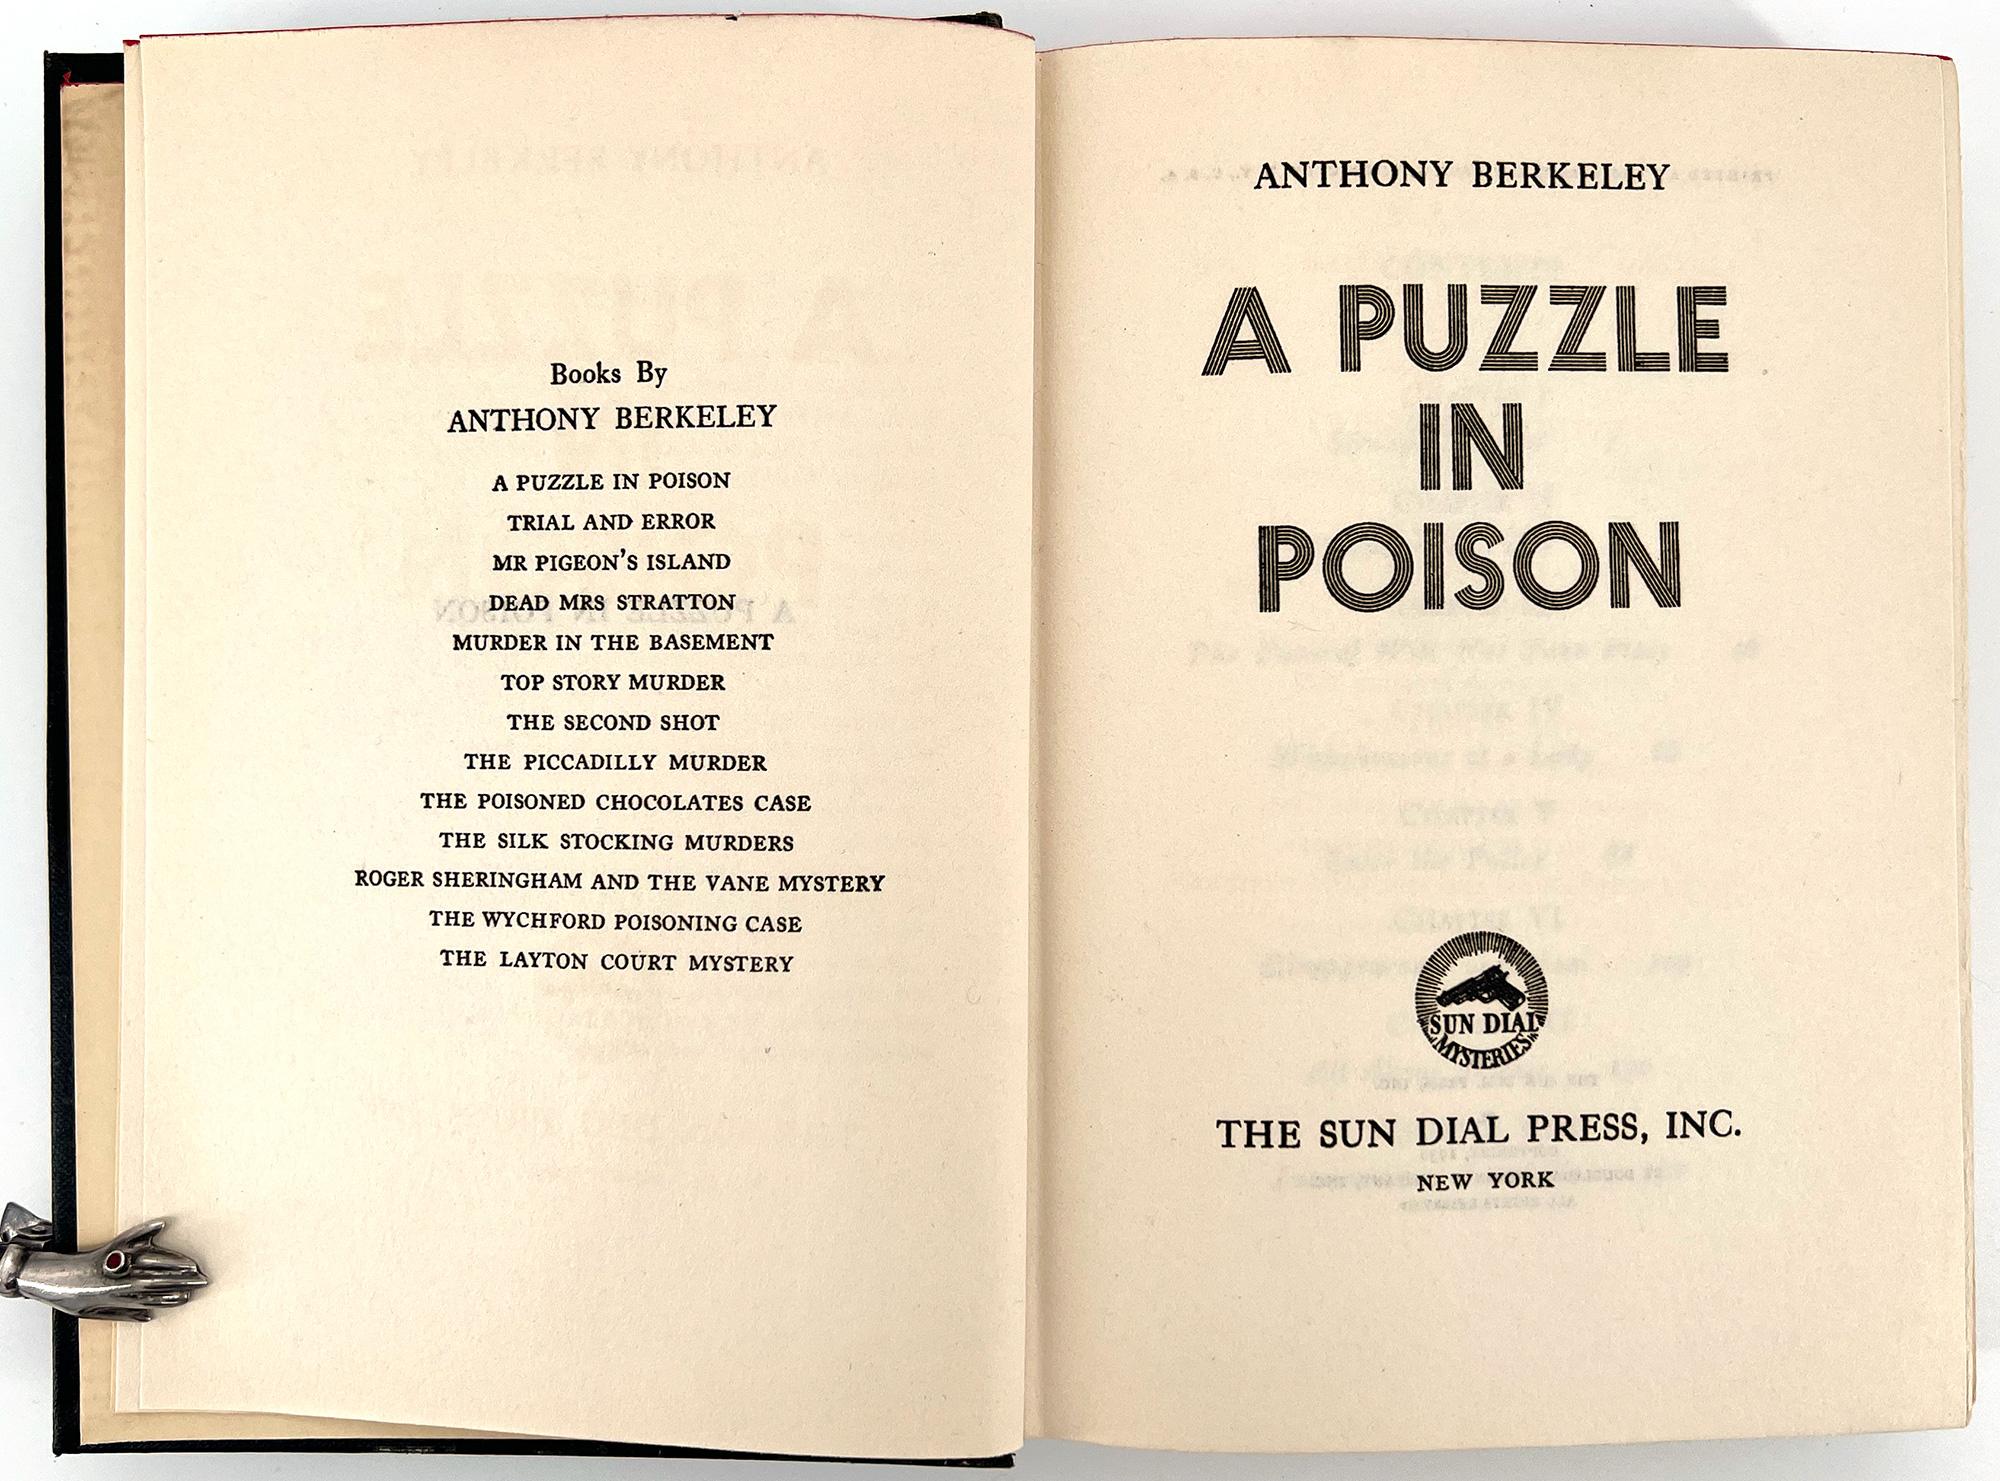 American Puzzle in Poison, by Anthony Berkeley For Sale